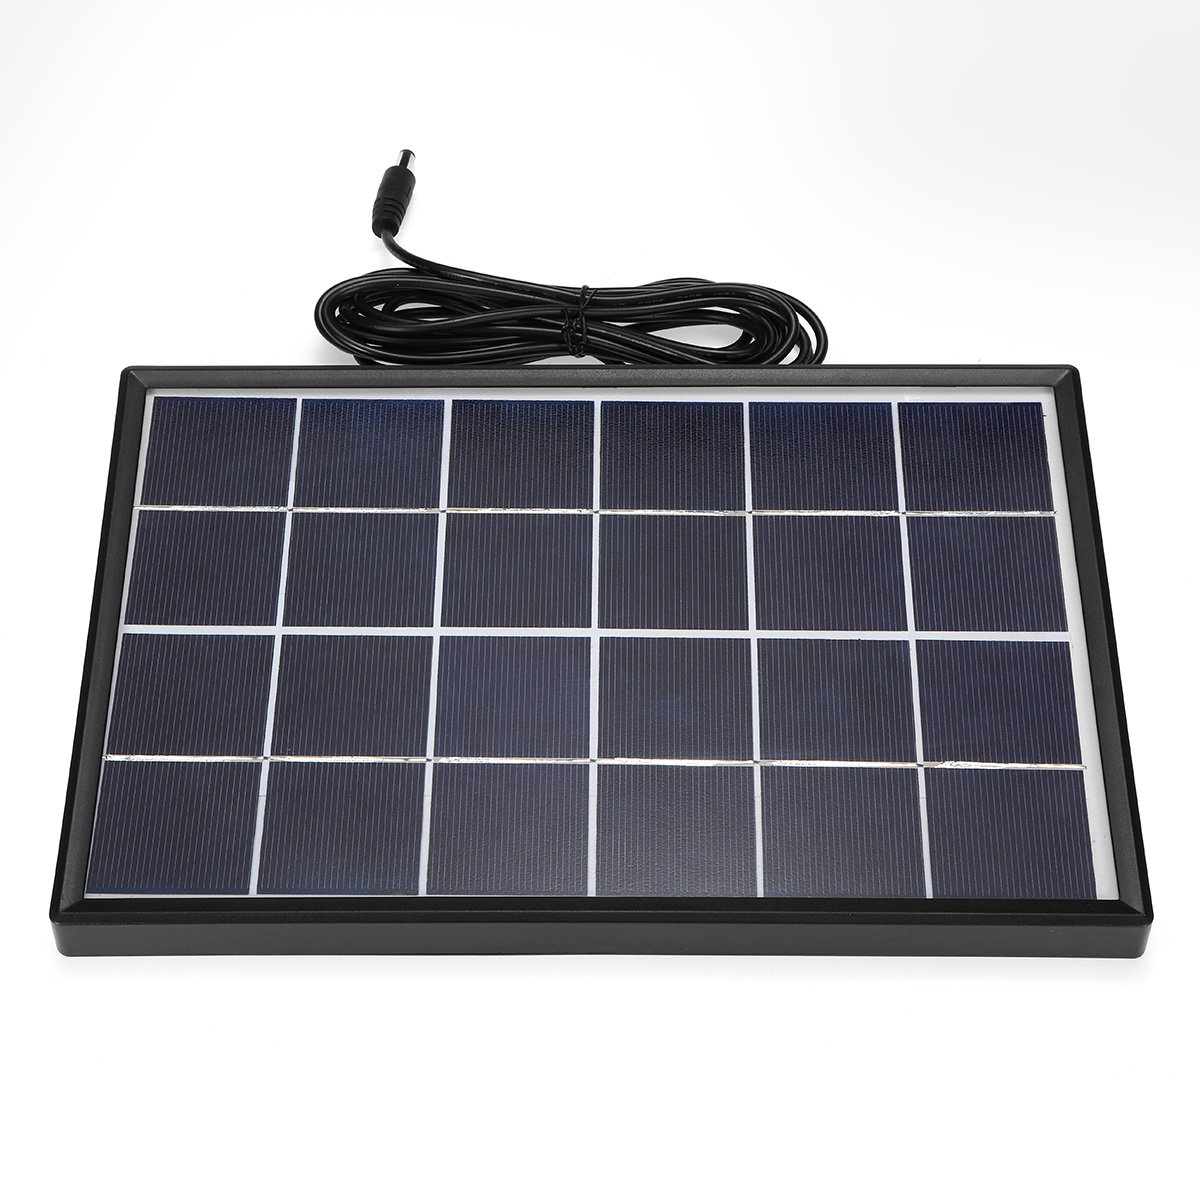 6W 6V 266*175*17mm Polysilicon Solar Panel with Cable & Border 1